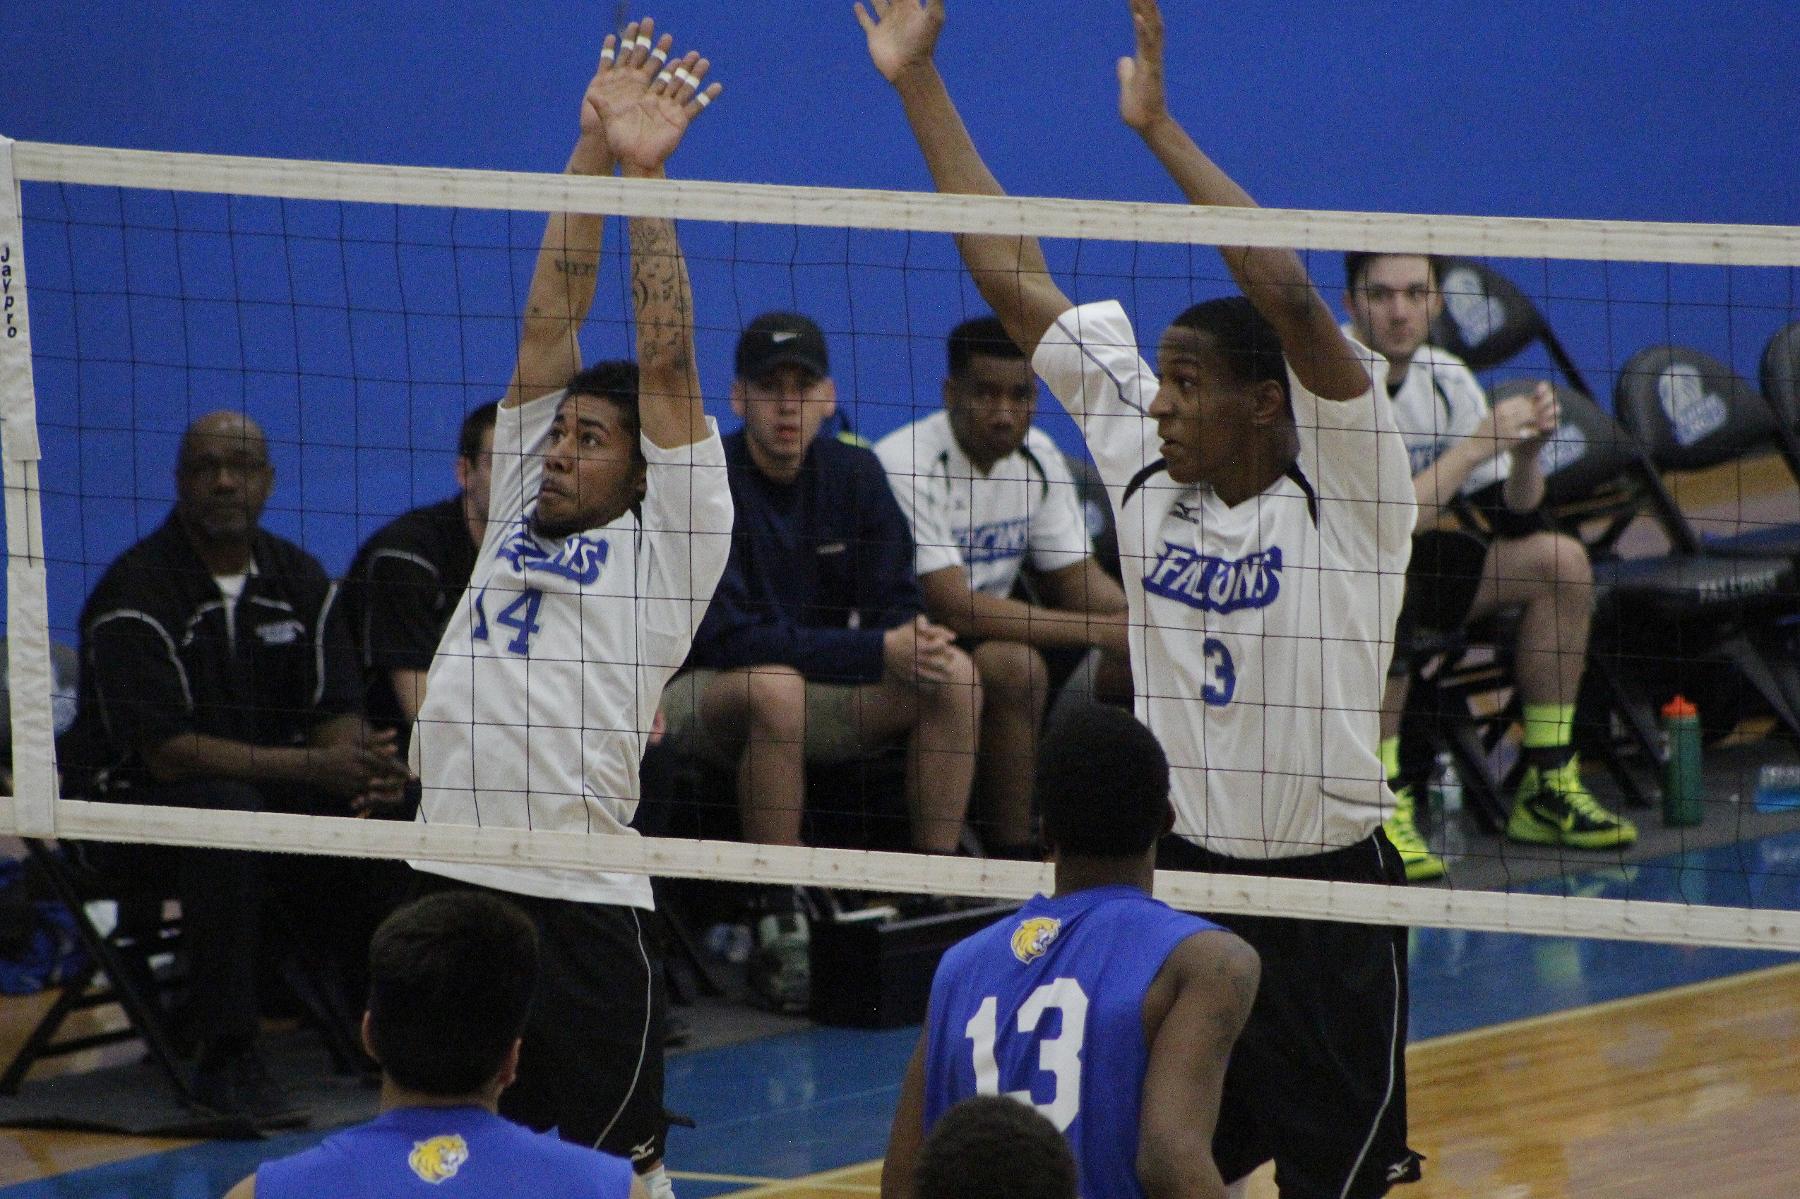 Men's Volleyball Falls at Home to Johnson & Wales